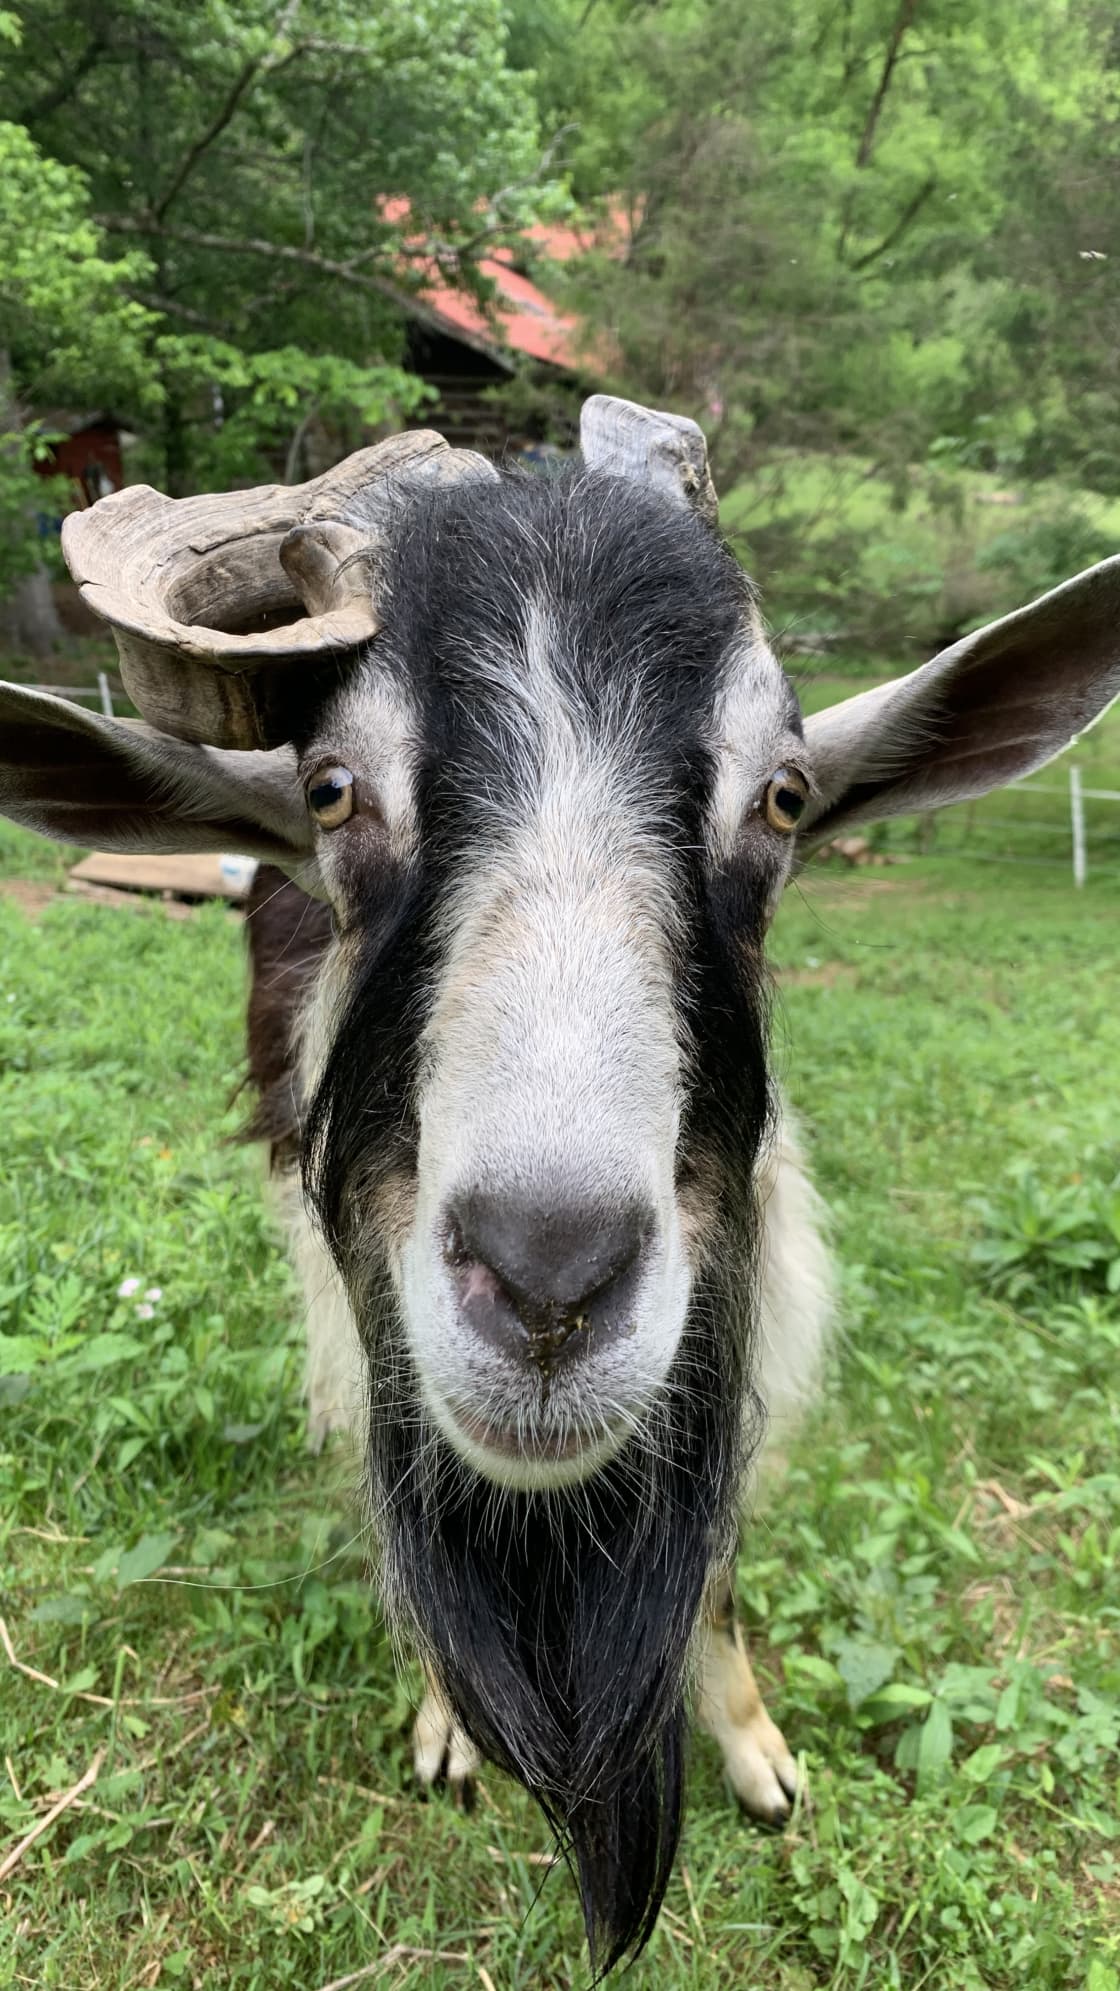 Come visit the ole’Homestead to meet Norman! He is a friendly loving Alpine Buck here at the ole’Homestead. He loves treats and getting scratches. 